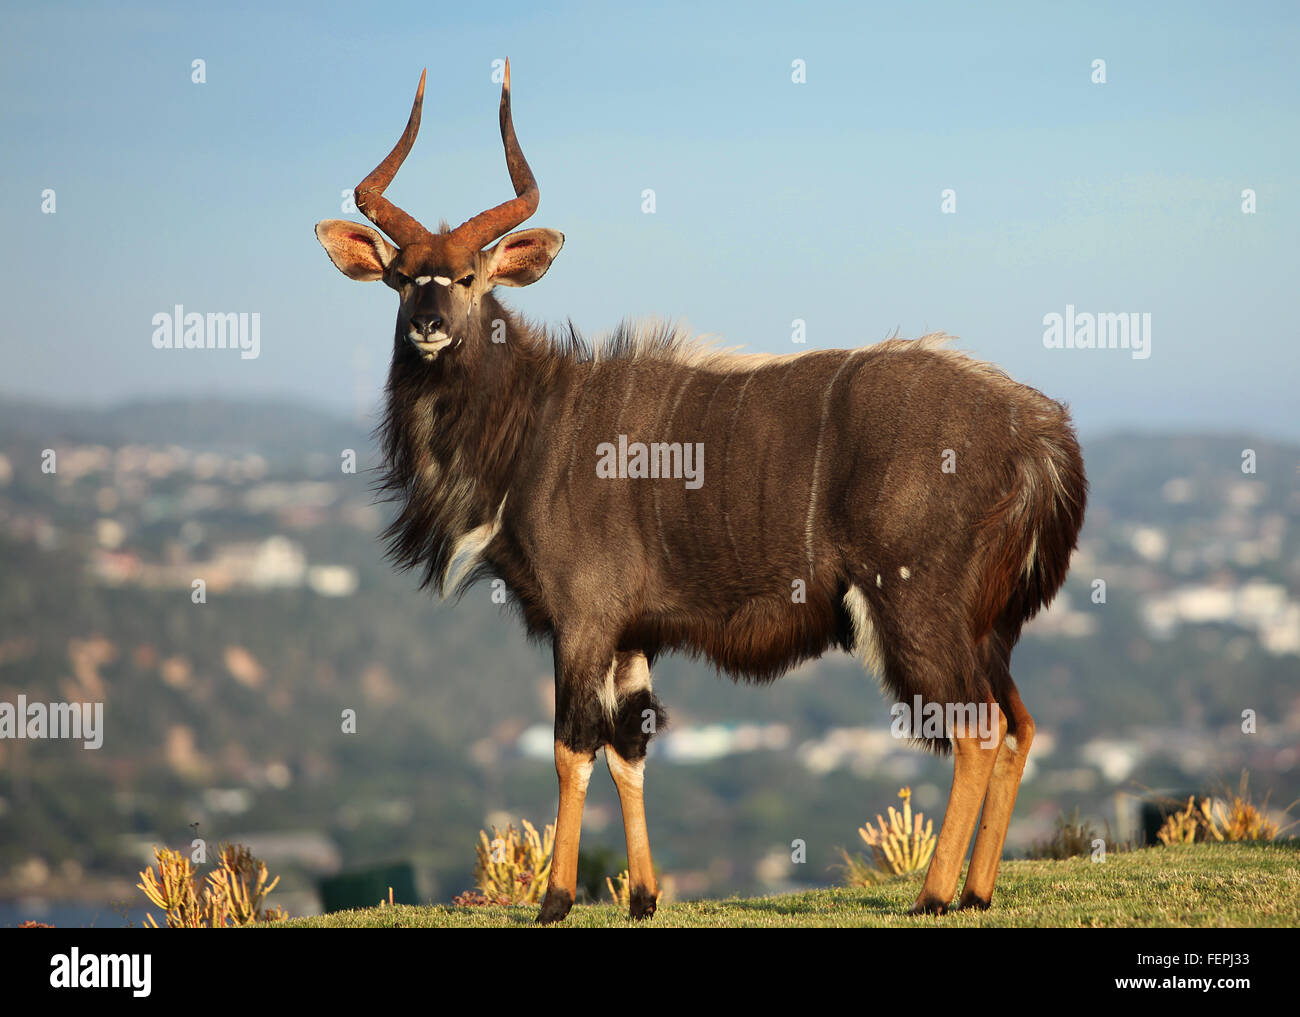 The Nyala is one of the most beautiful buck species in Africa. They are elegant and inquisitive. Stock Photo